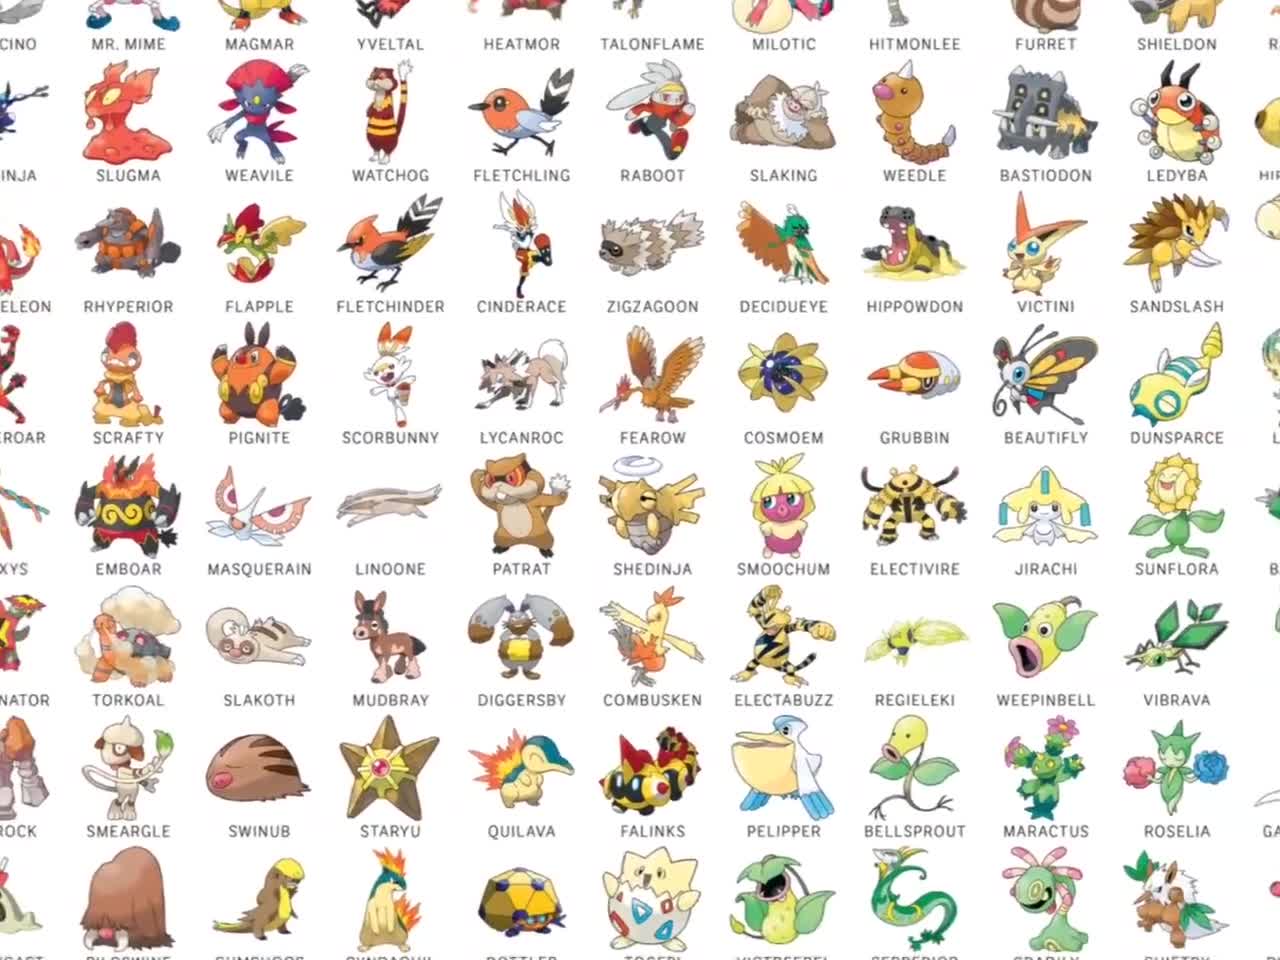 National Pokedex and List of All Pokemon